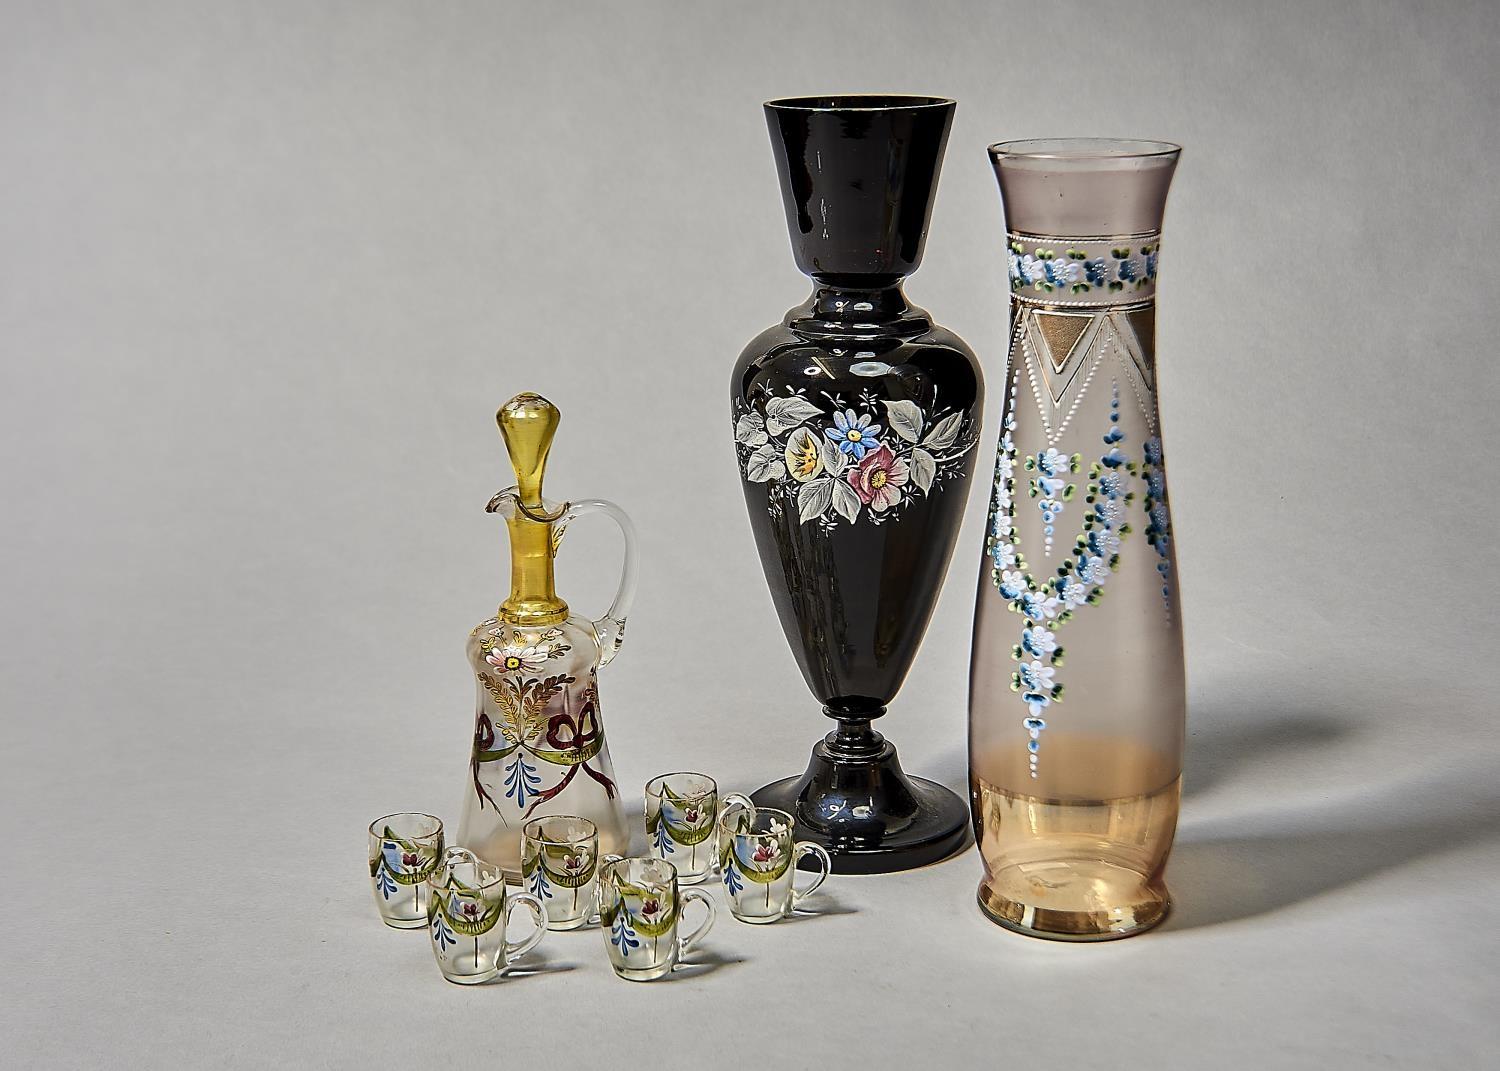 A FRENCH ENAMELLED GLASS LIQUER SET, C1910, DECORATED WITH FESTOONS AND FLOWERS, EWER AND STOPPER